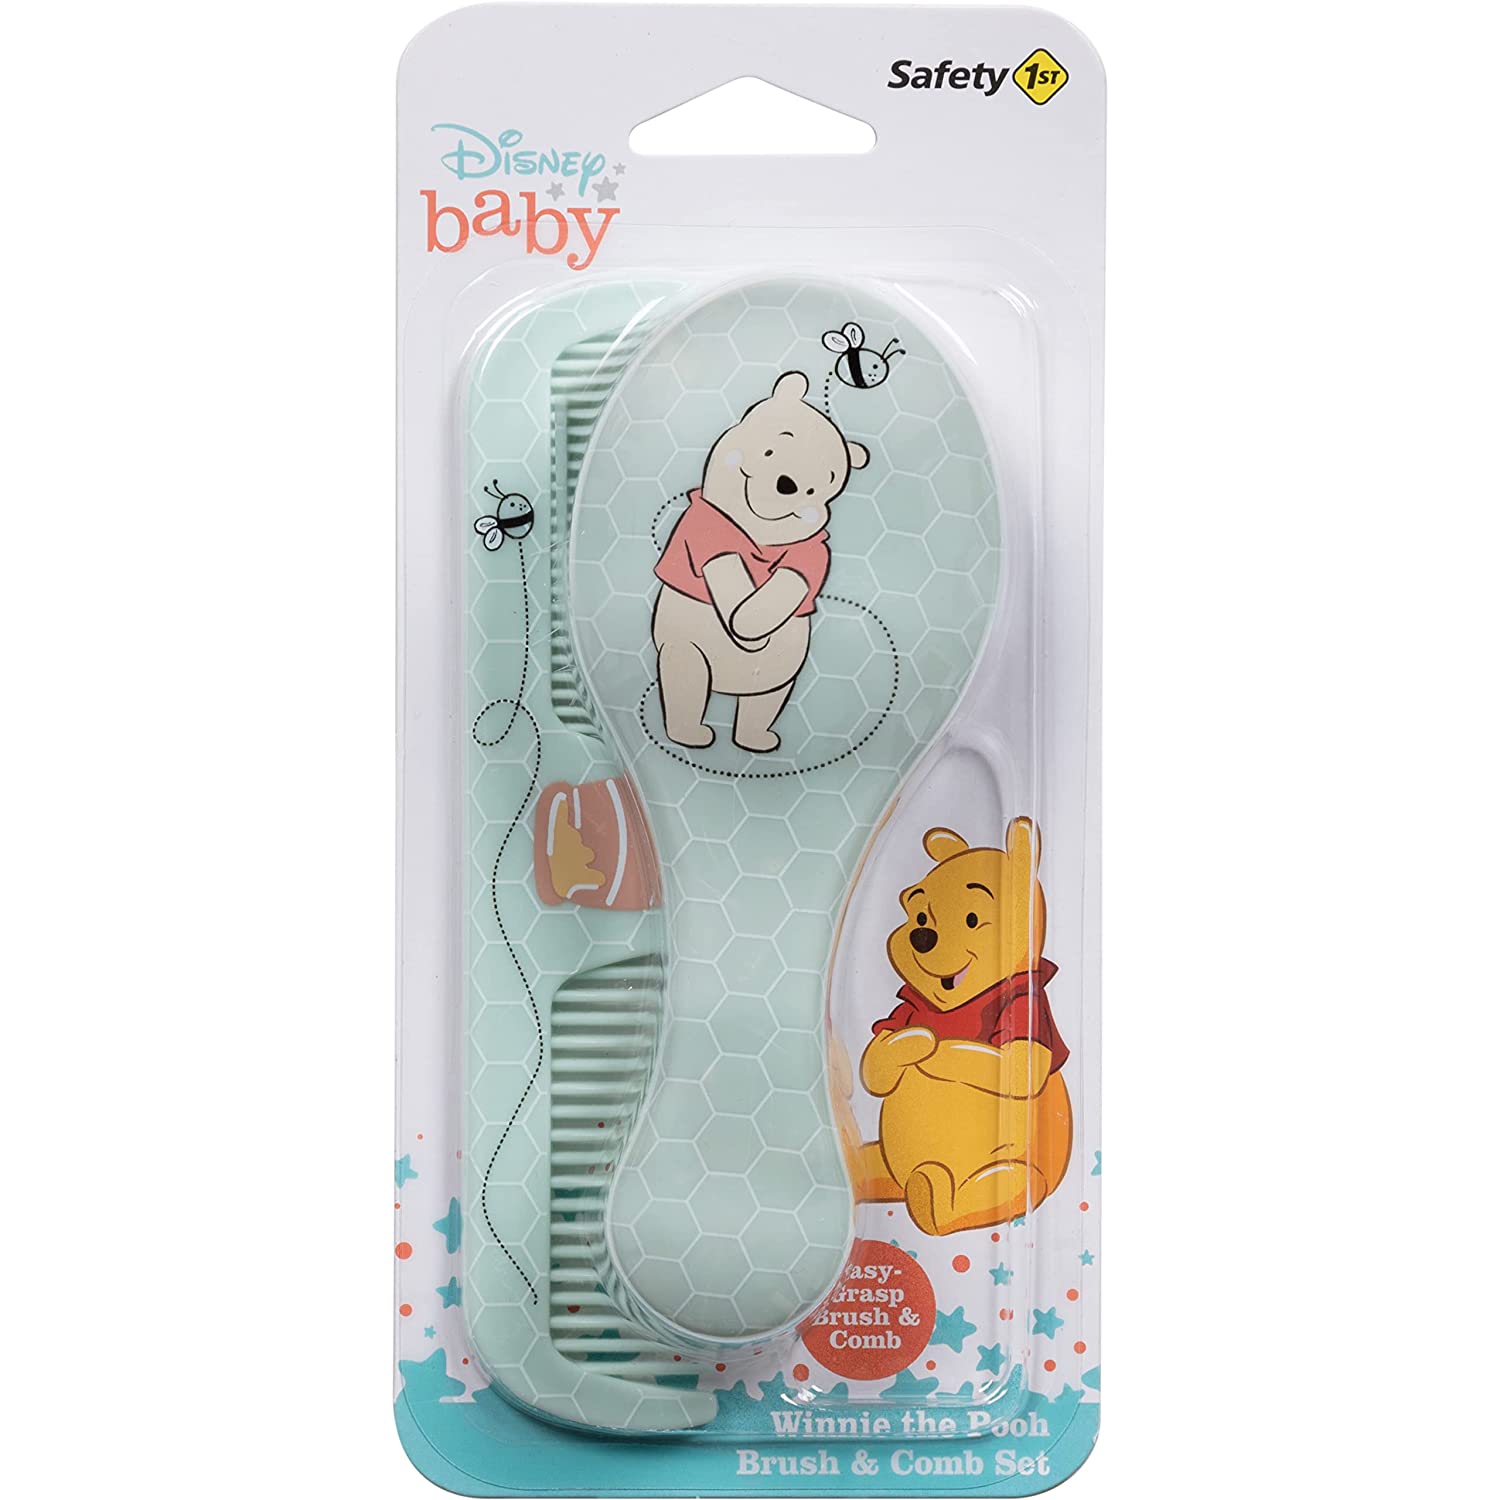 Disney Baby - Winnie The Pooh Brush & Comb Set - With Easy Grip Handles